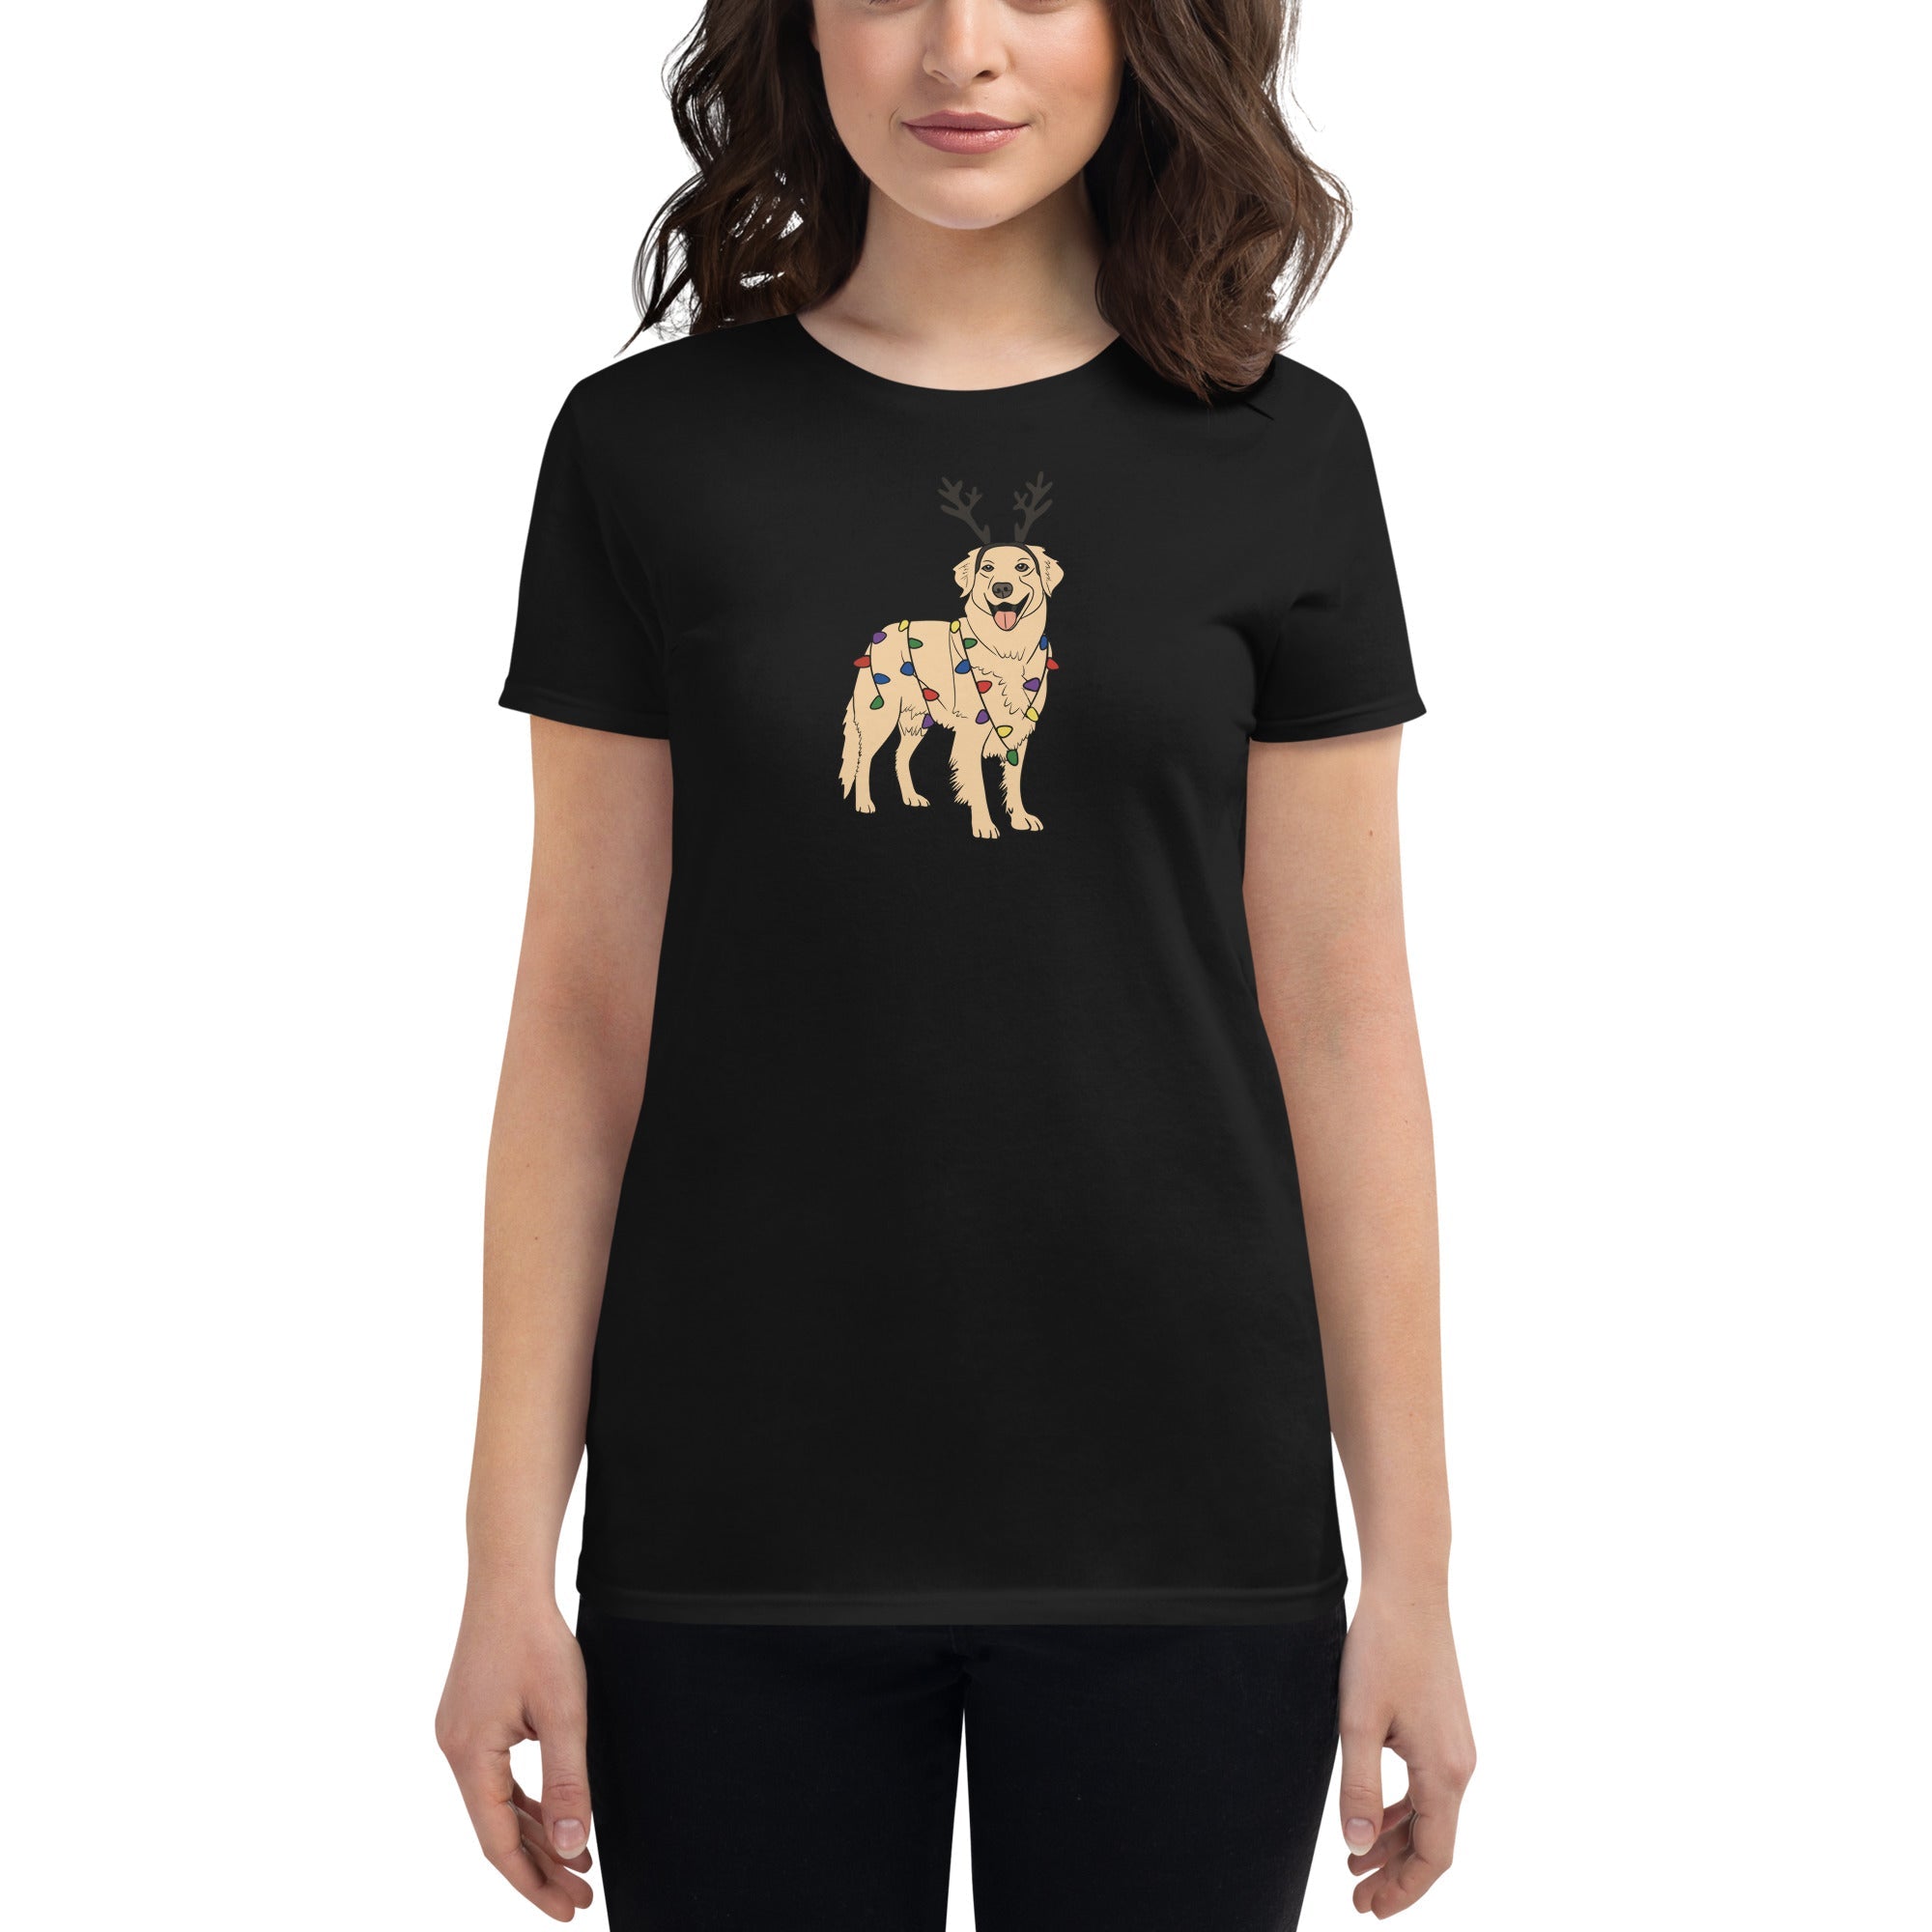 Getting in the Holiday Spirit Women's Fit T-Shirt - TAILWAGS UNLIMITED